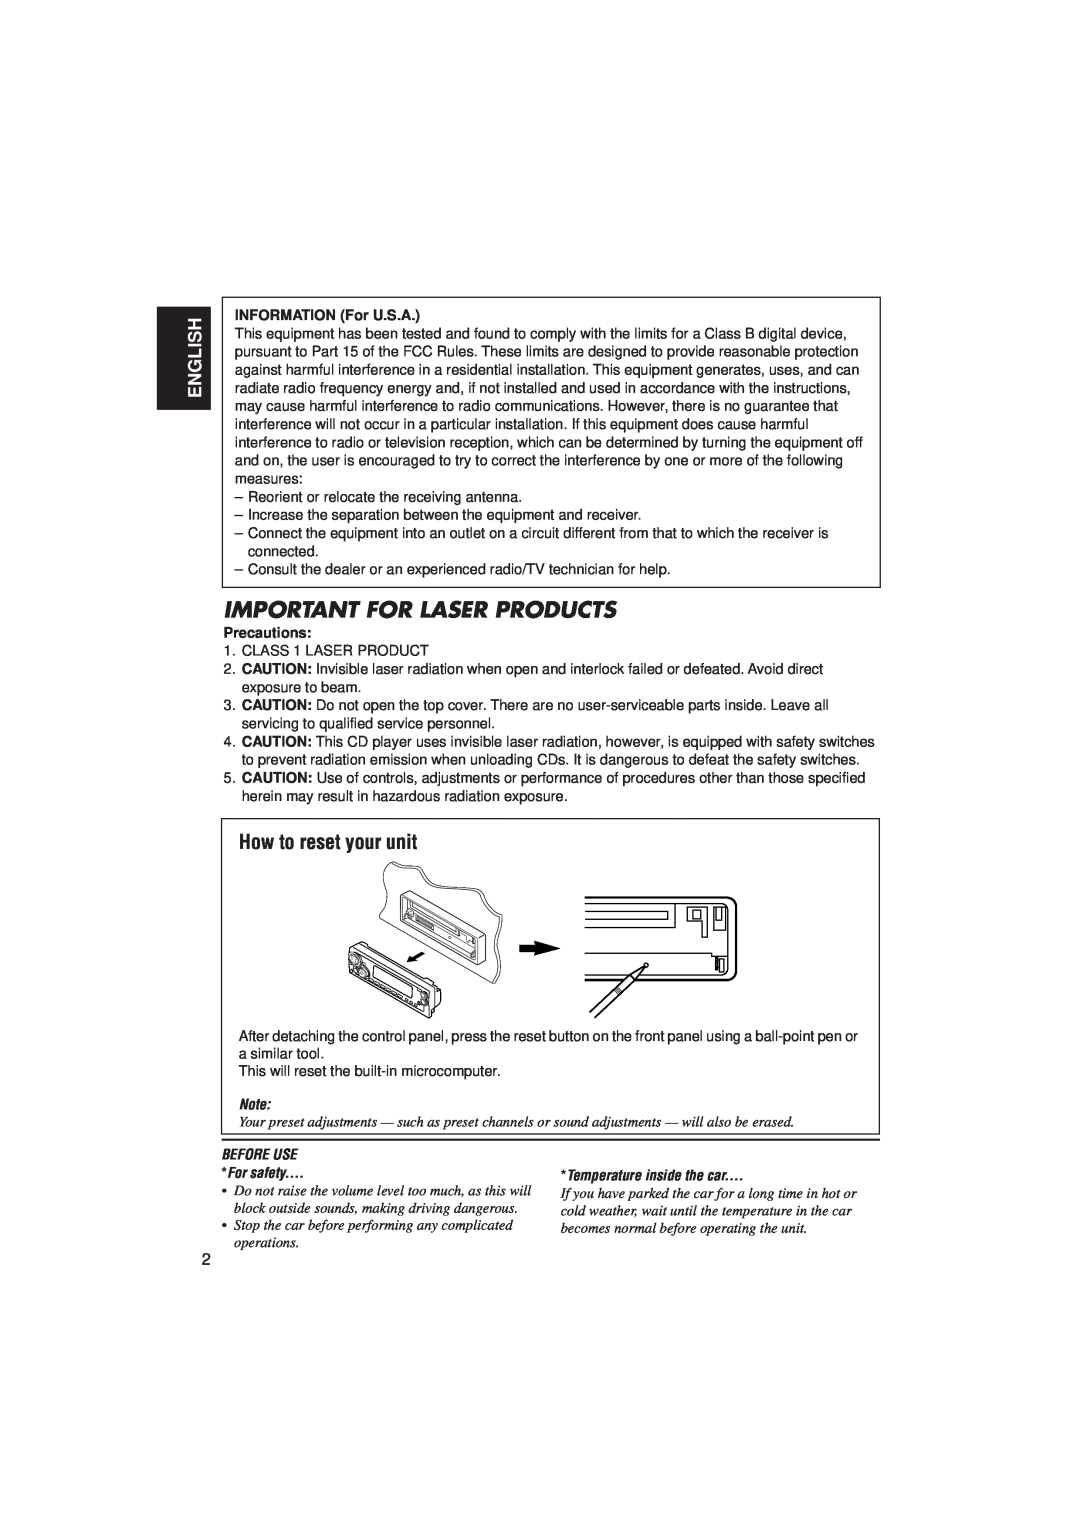 JVC KD-SX8250, KD-SX780 Important For Laser Products, How to reset your unit, English, INFORMATION For U.S.A, Precautions 